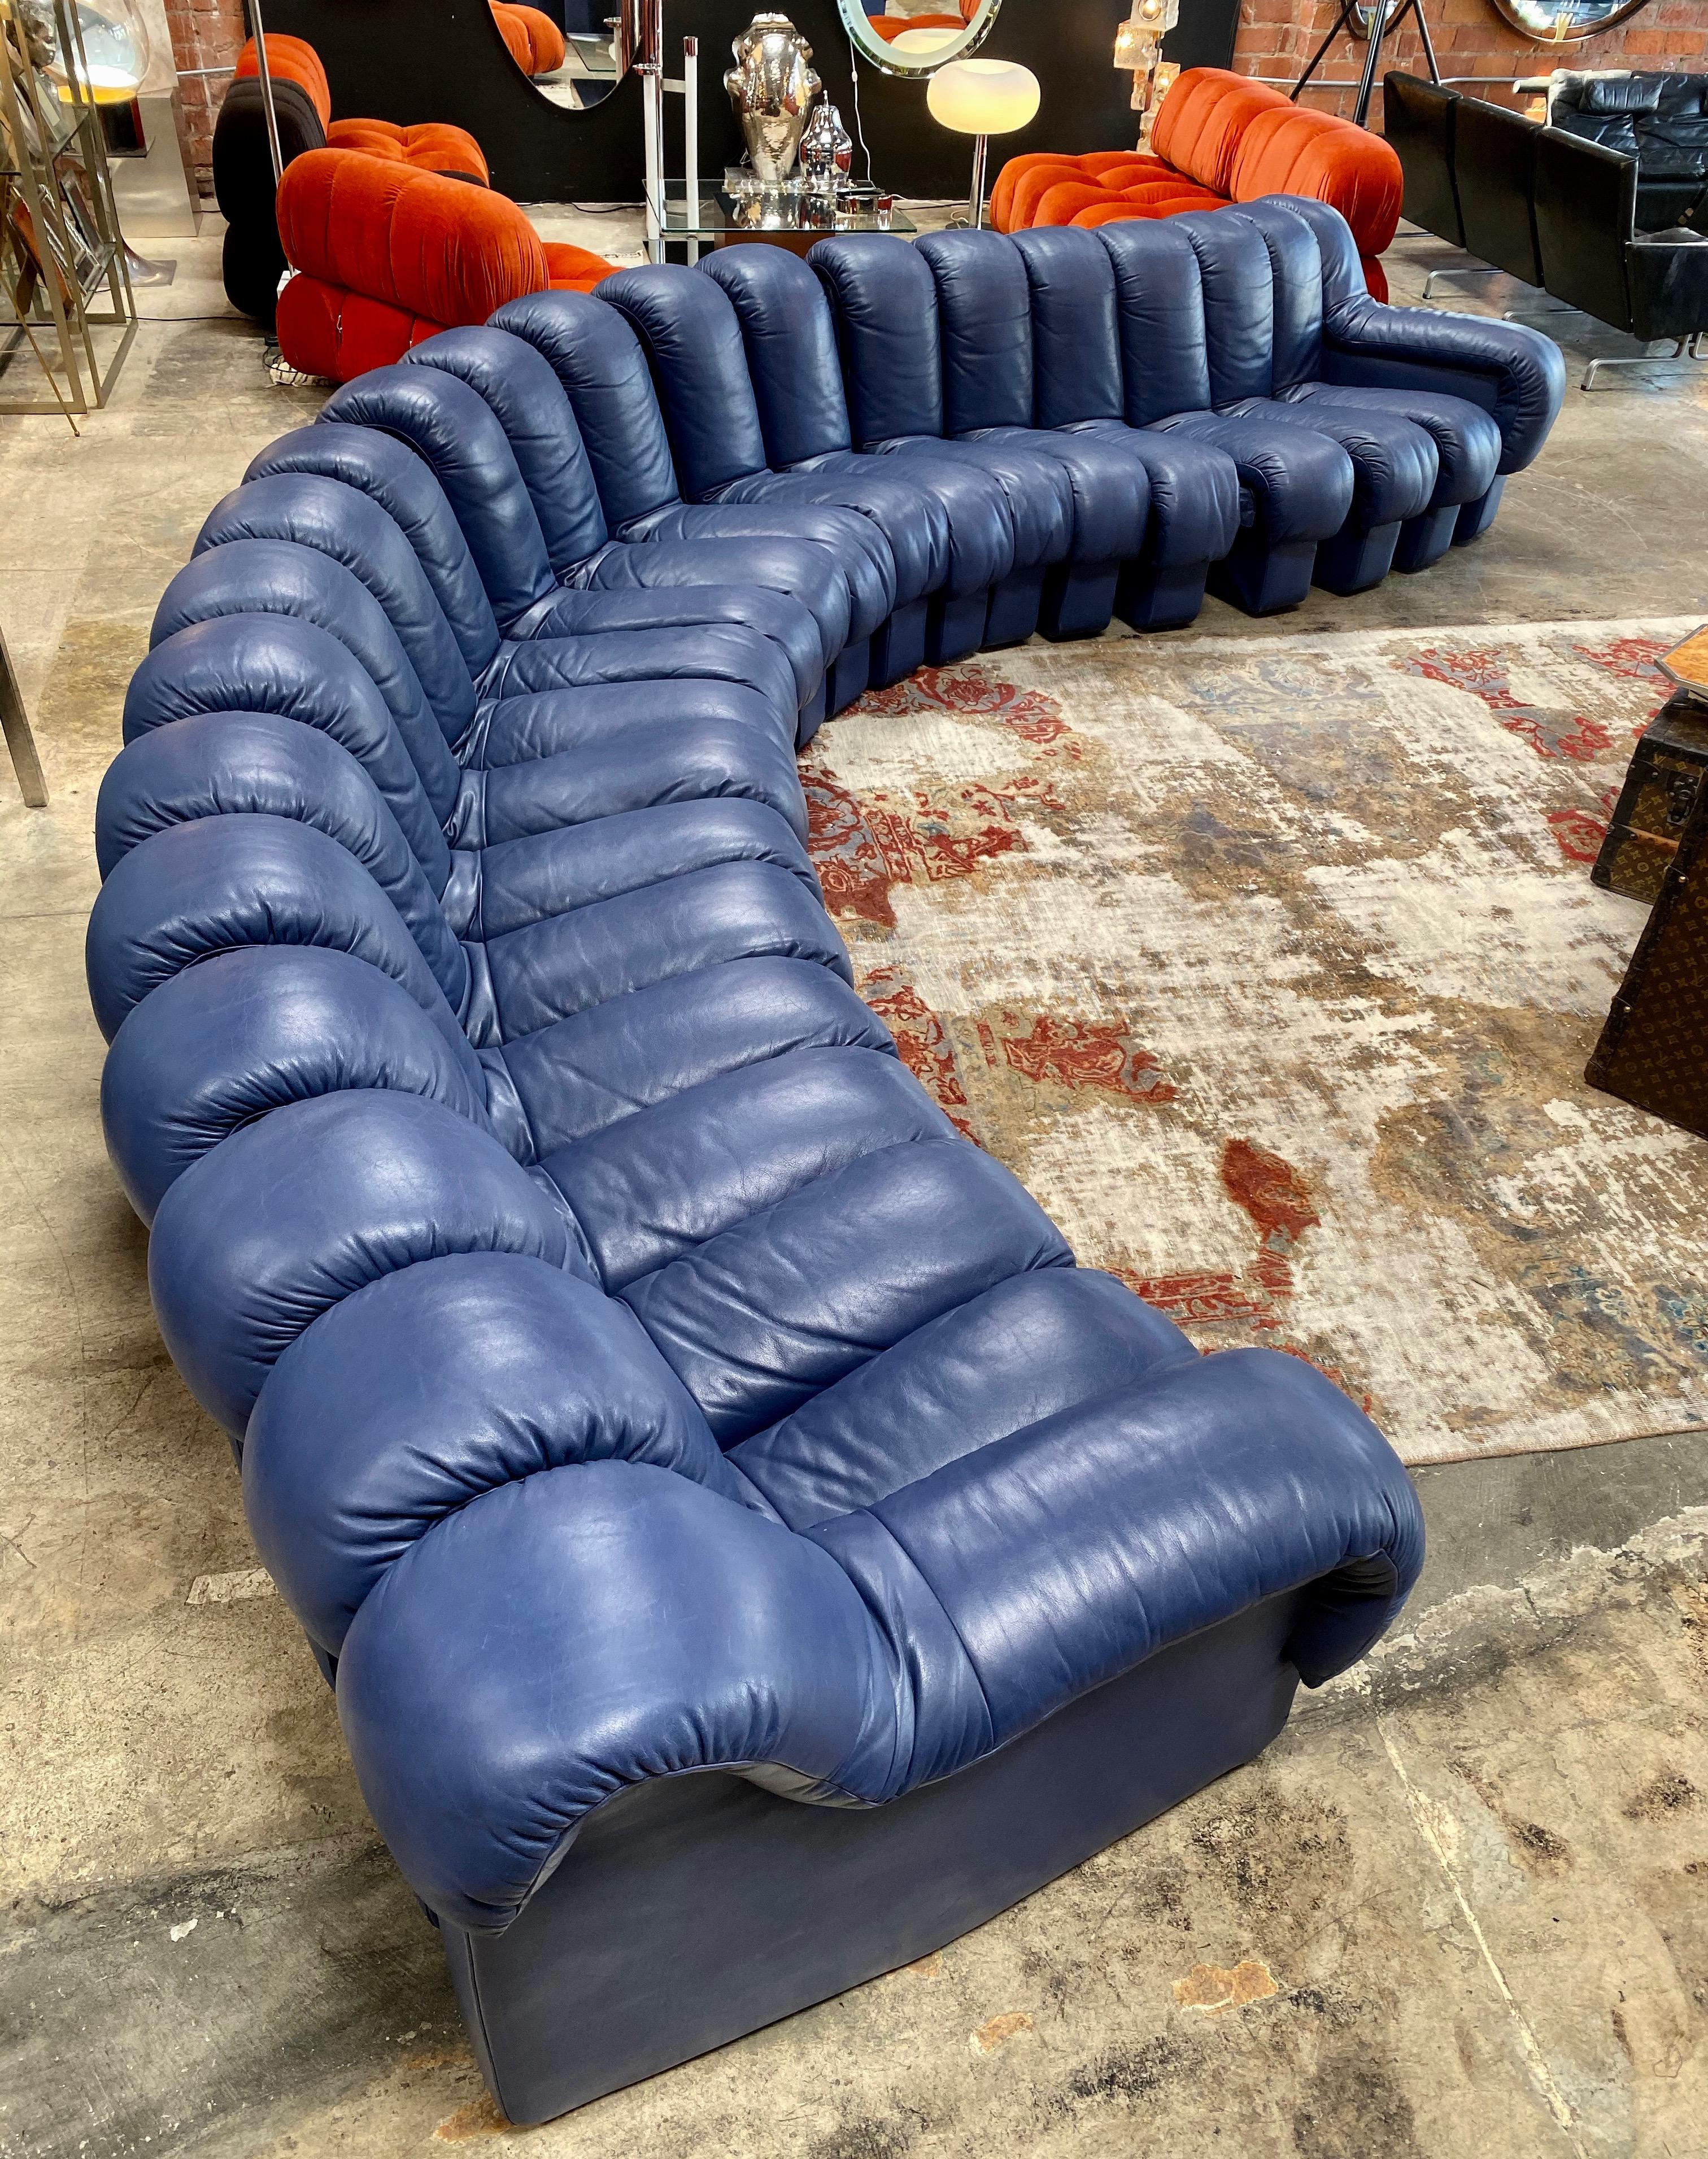 One of the most striking pieces of 1970s design: the De Sede DS600 modular sofa.
This particular example features rich and supple blue leather comprised of 22 elements, with felt-lined sides. As you can see in the photos, the sofa can be twisted